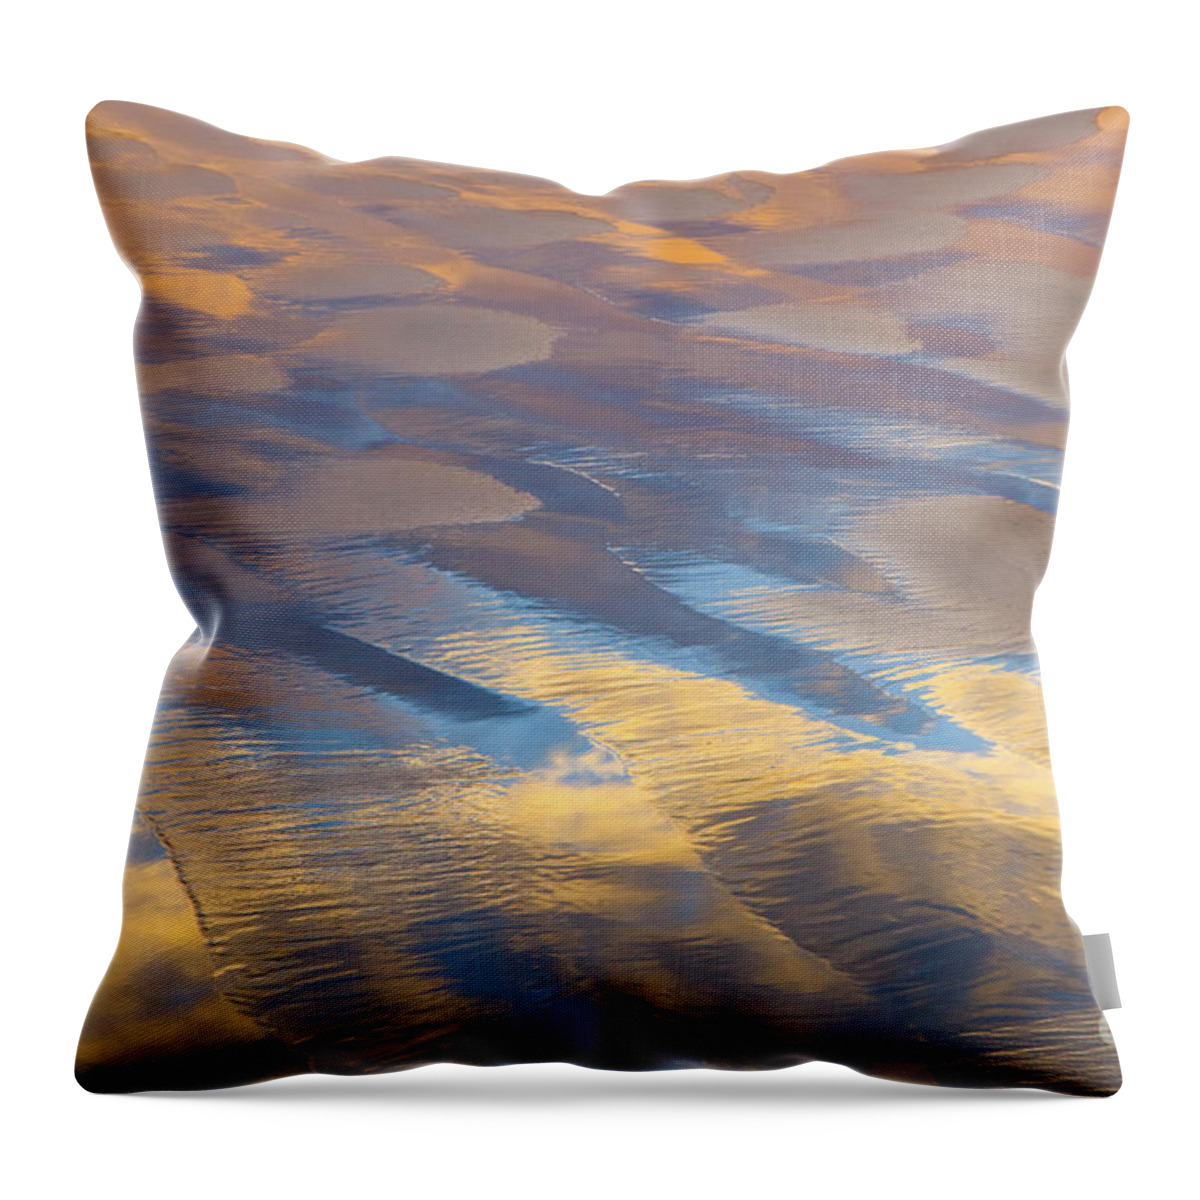 00345479 Throw Pillow featuring the photograph Clouds Sky And Sand Ripples by Yva Momatiuk John Eastcott